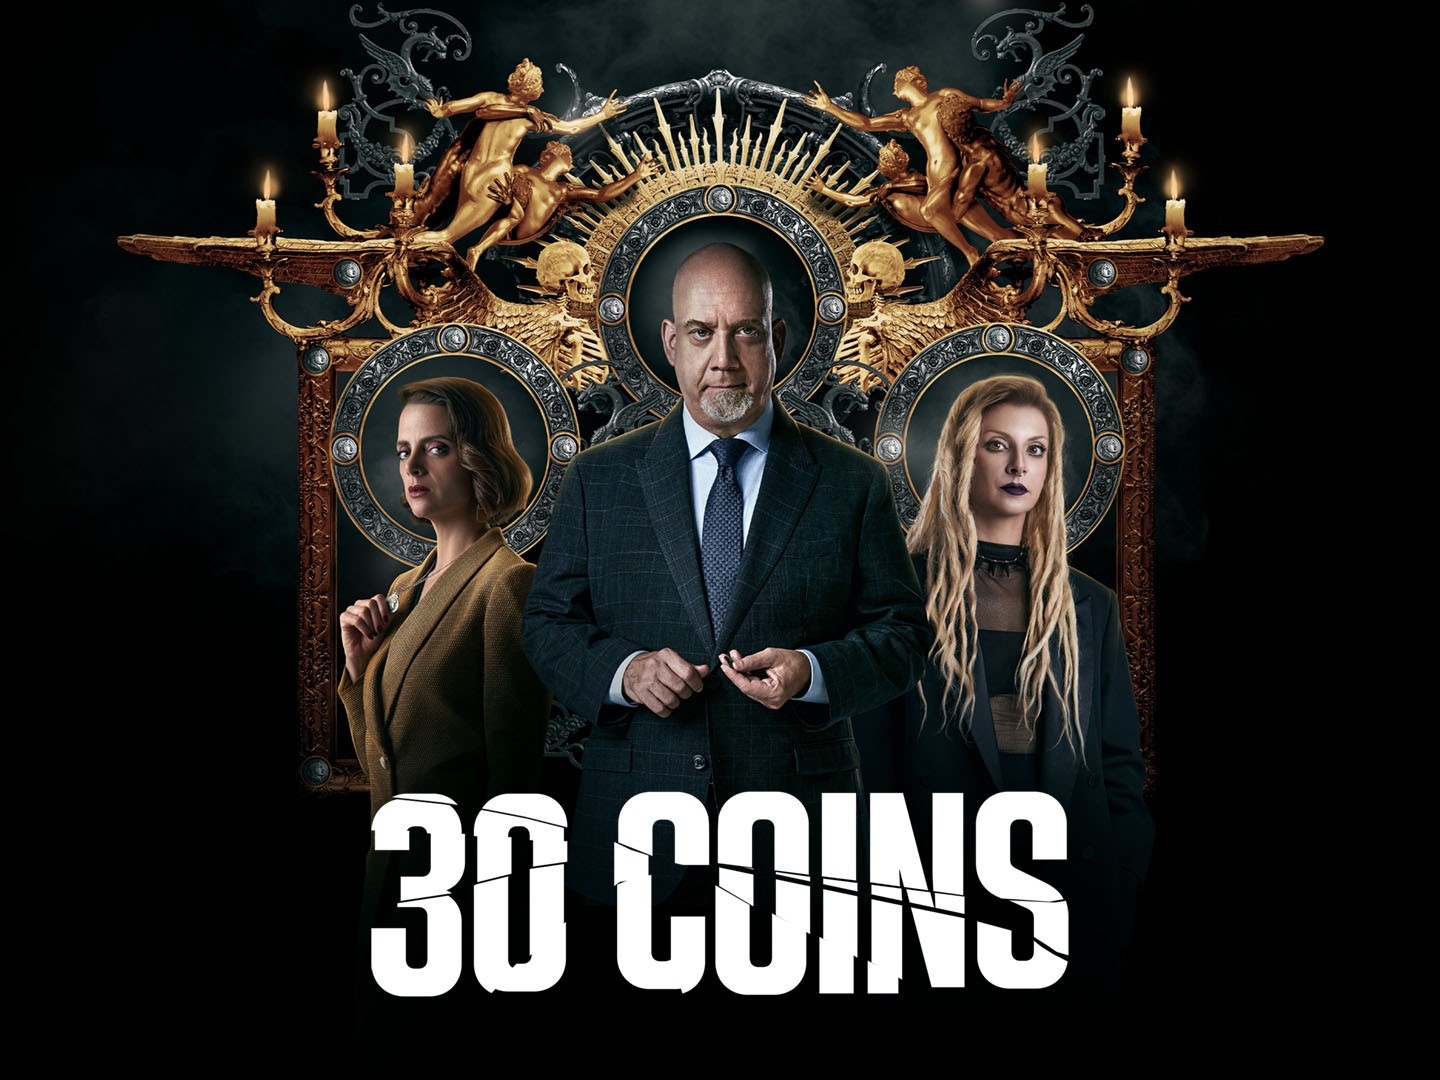 HBO Europe Greenlights Spanish Original Series '30 Coins' – The